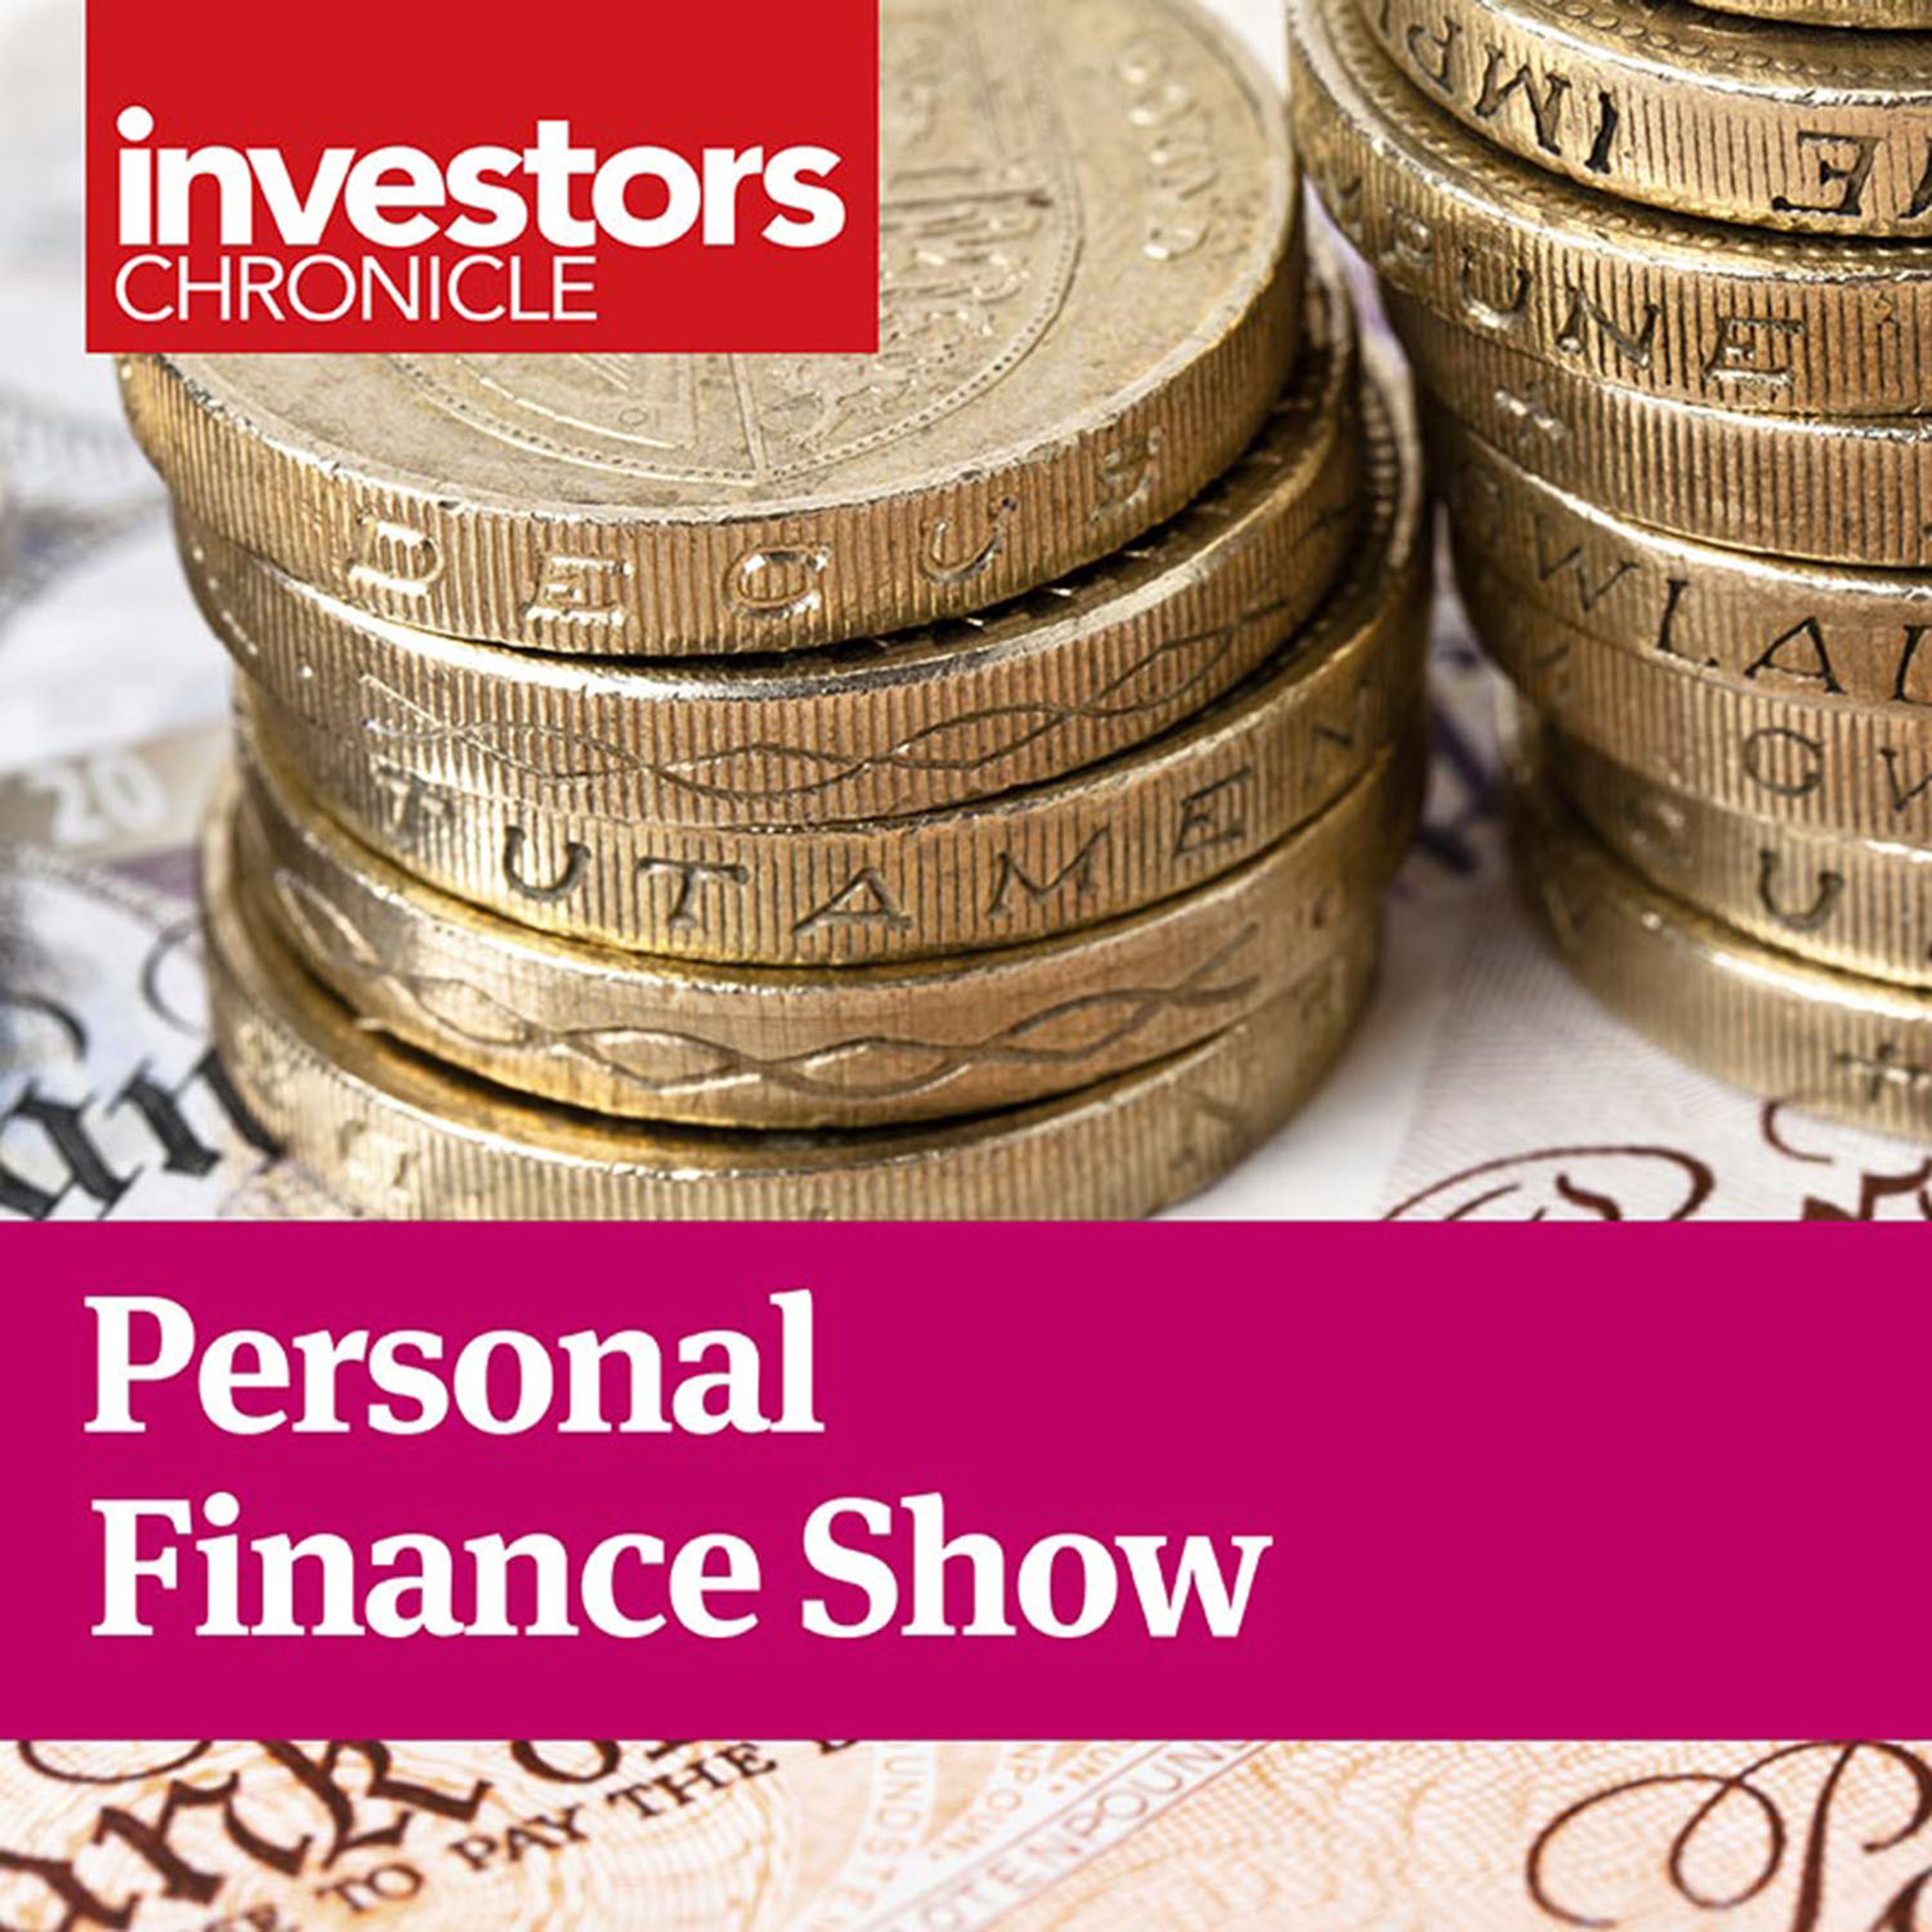 Personal Finance Podcast: The Budget's impact on savers and EIS